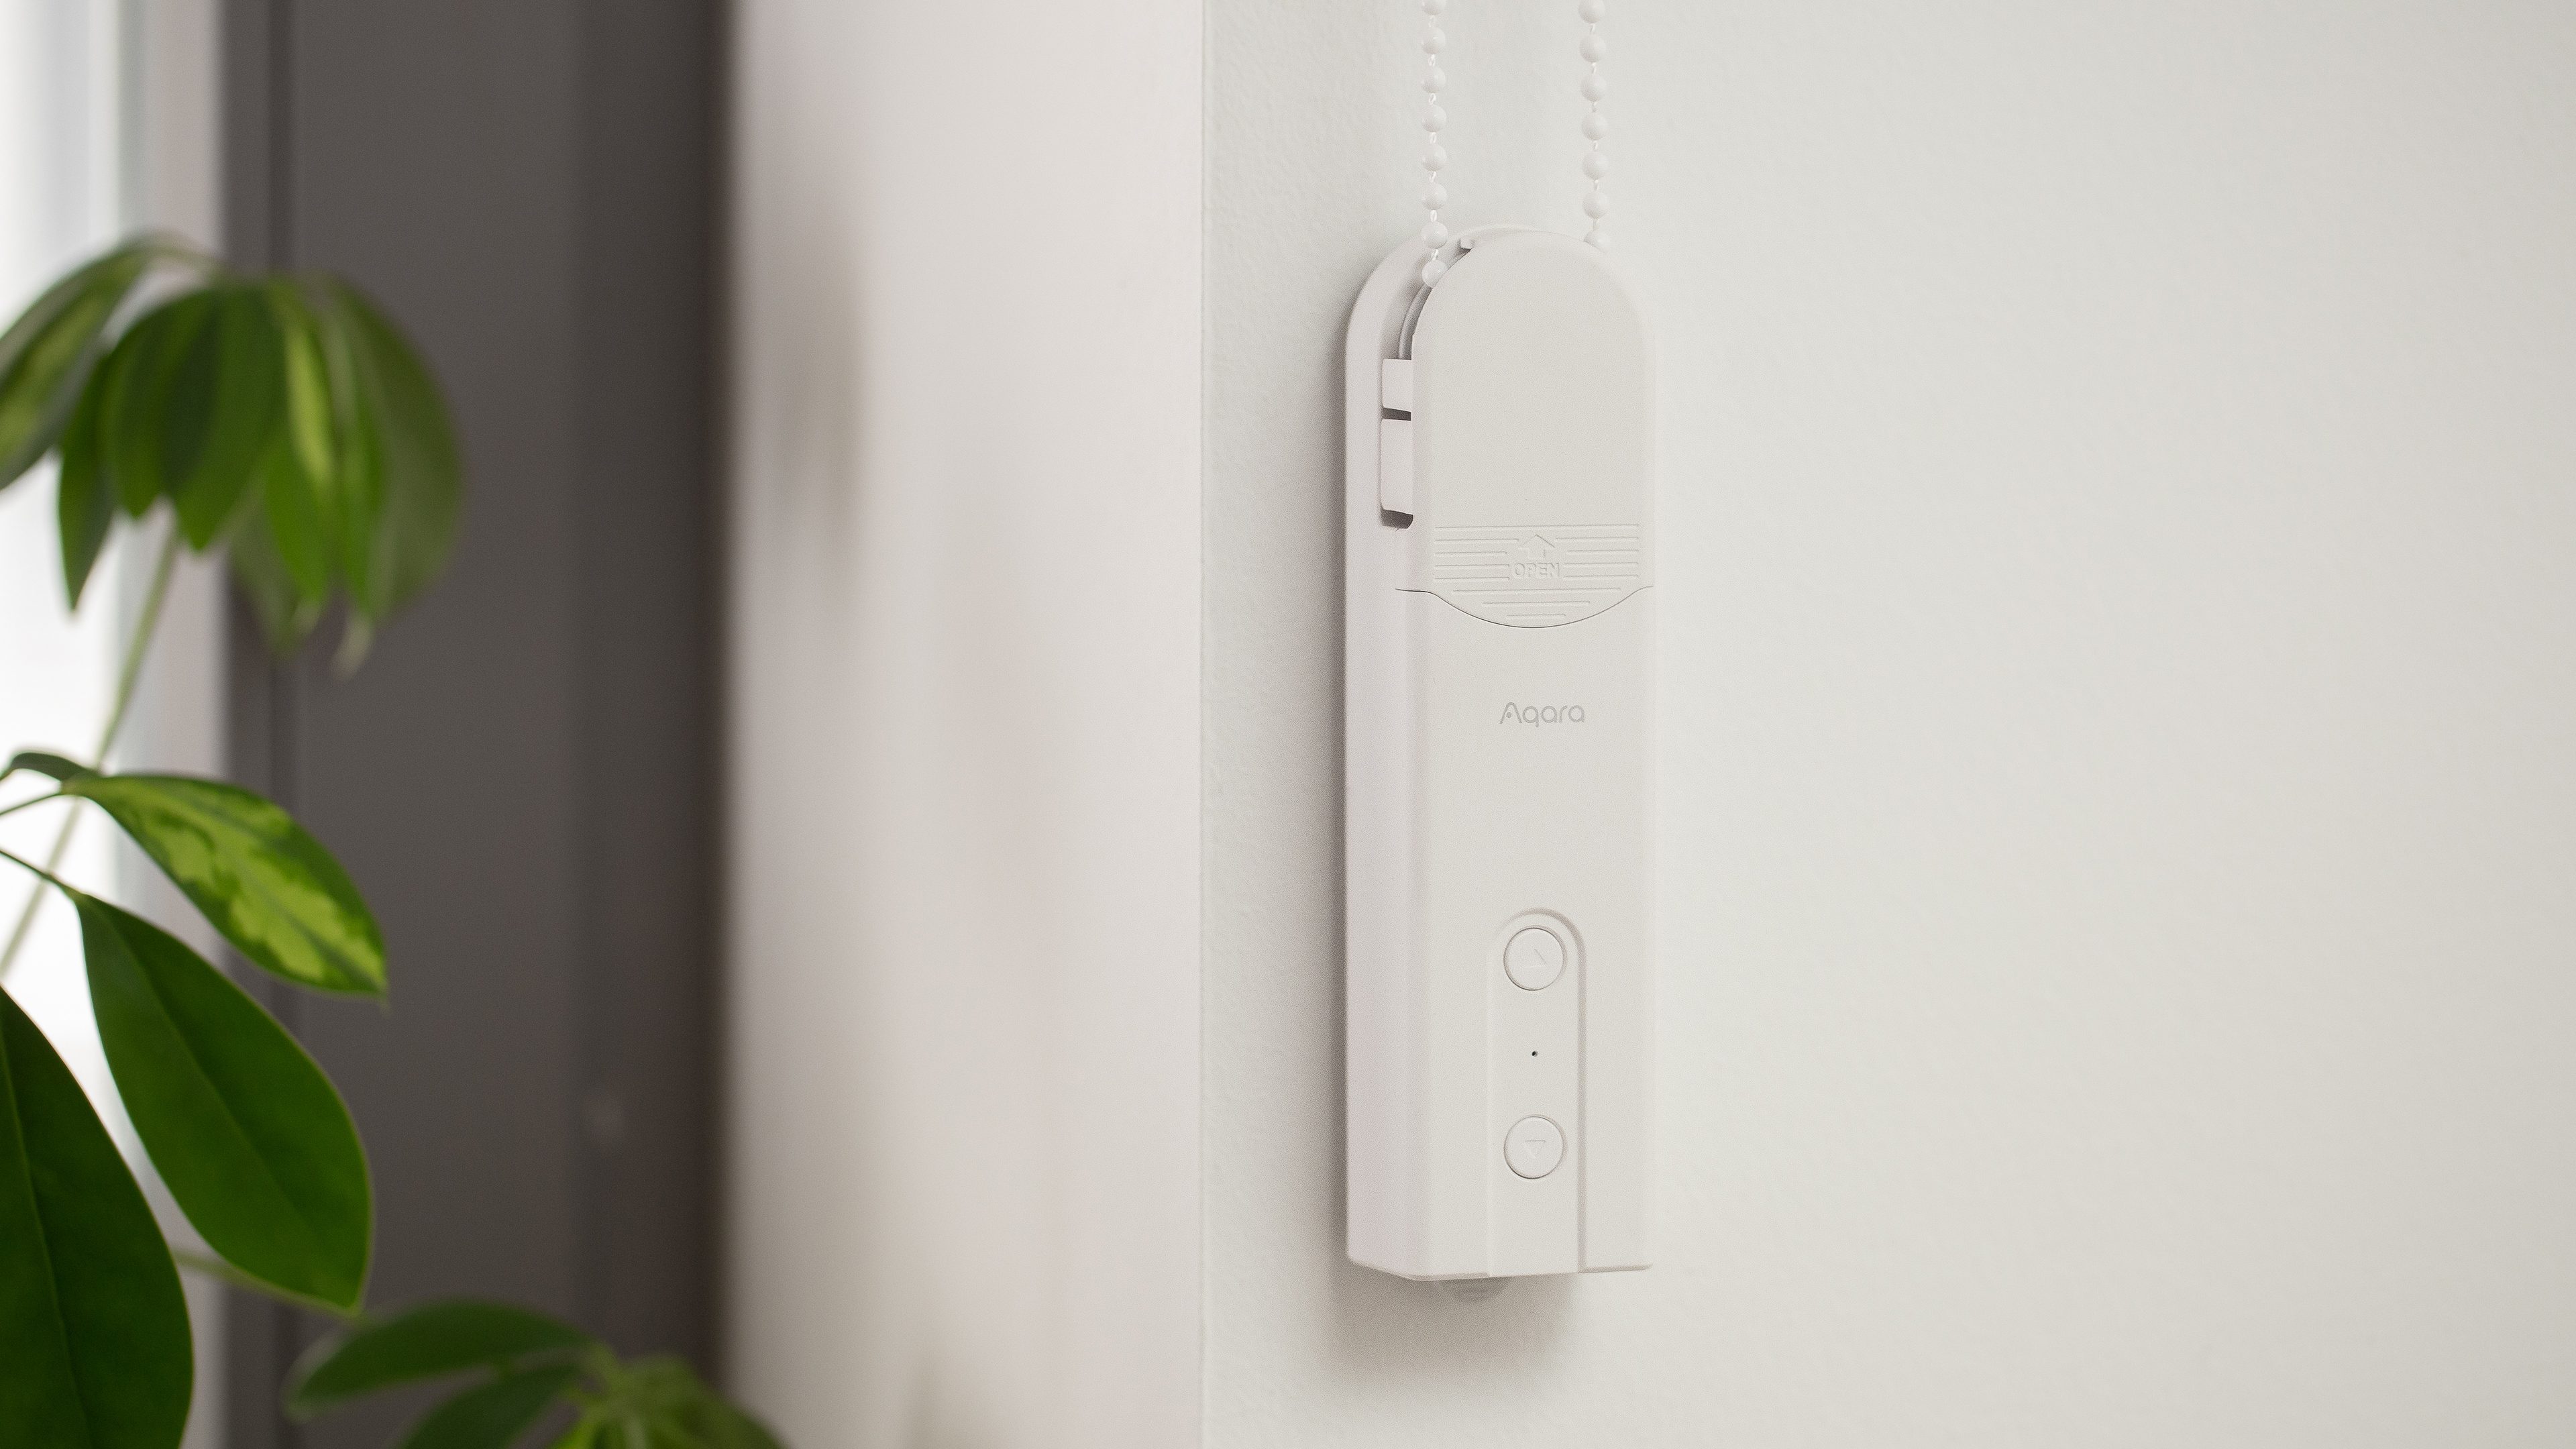 Test: This cheap connected gadget that rolls up your blinds will change your life (no)